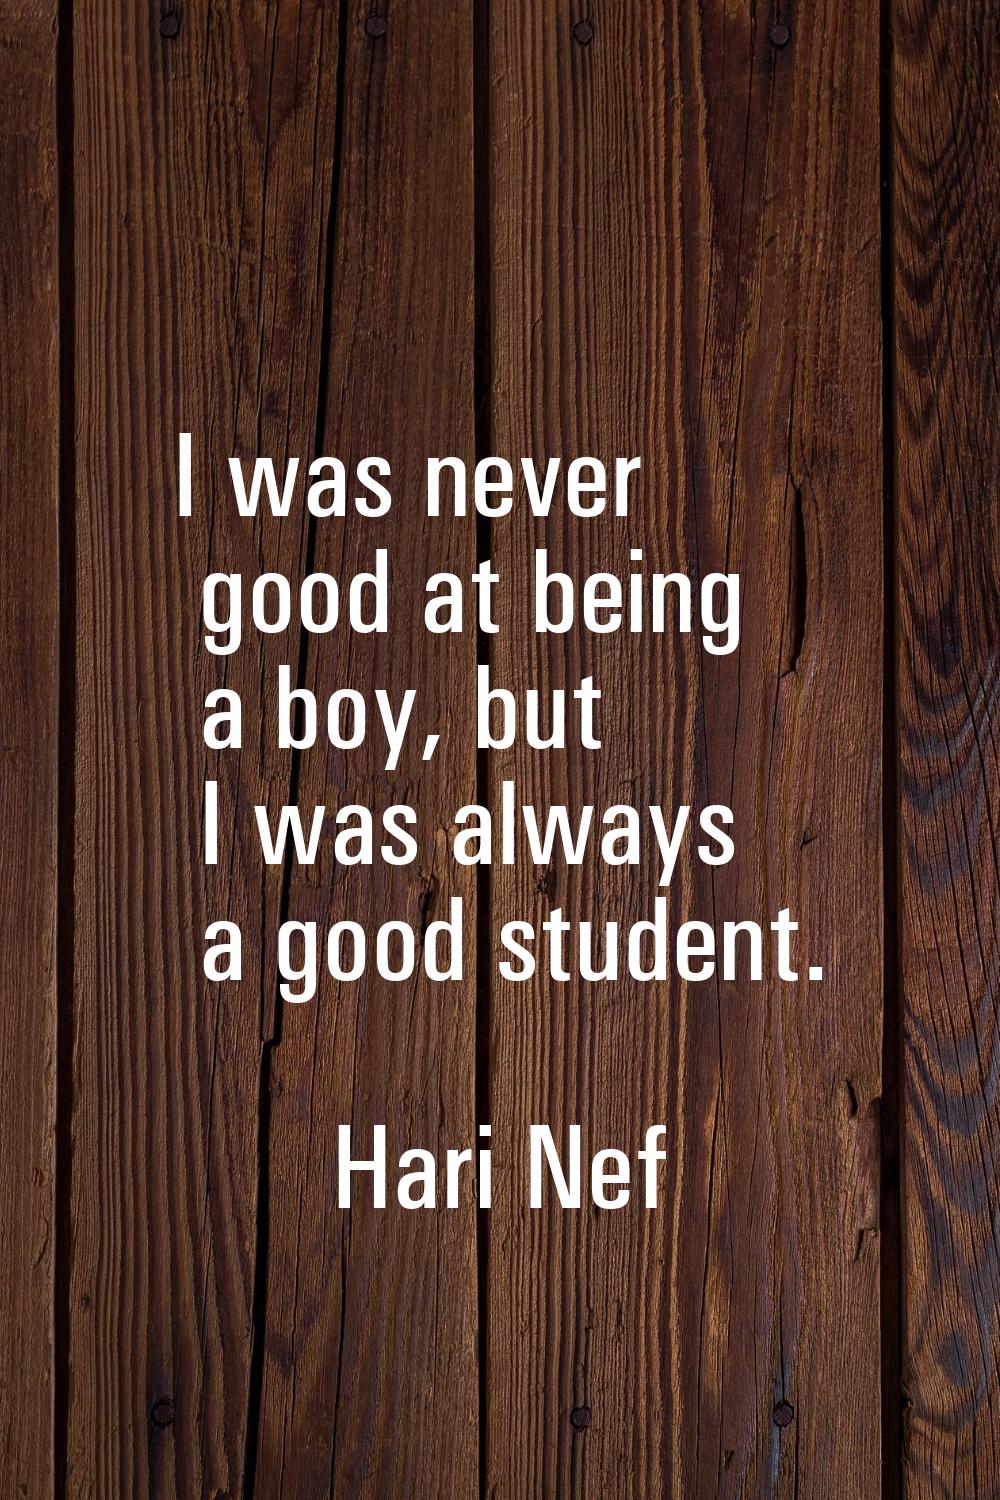 I was never good at being a boy, but I was always a good student.